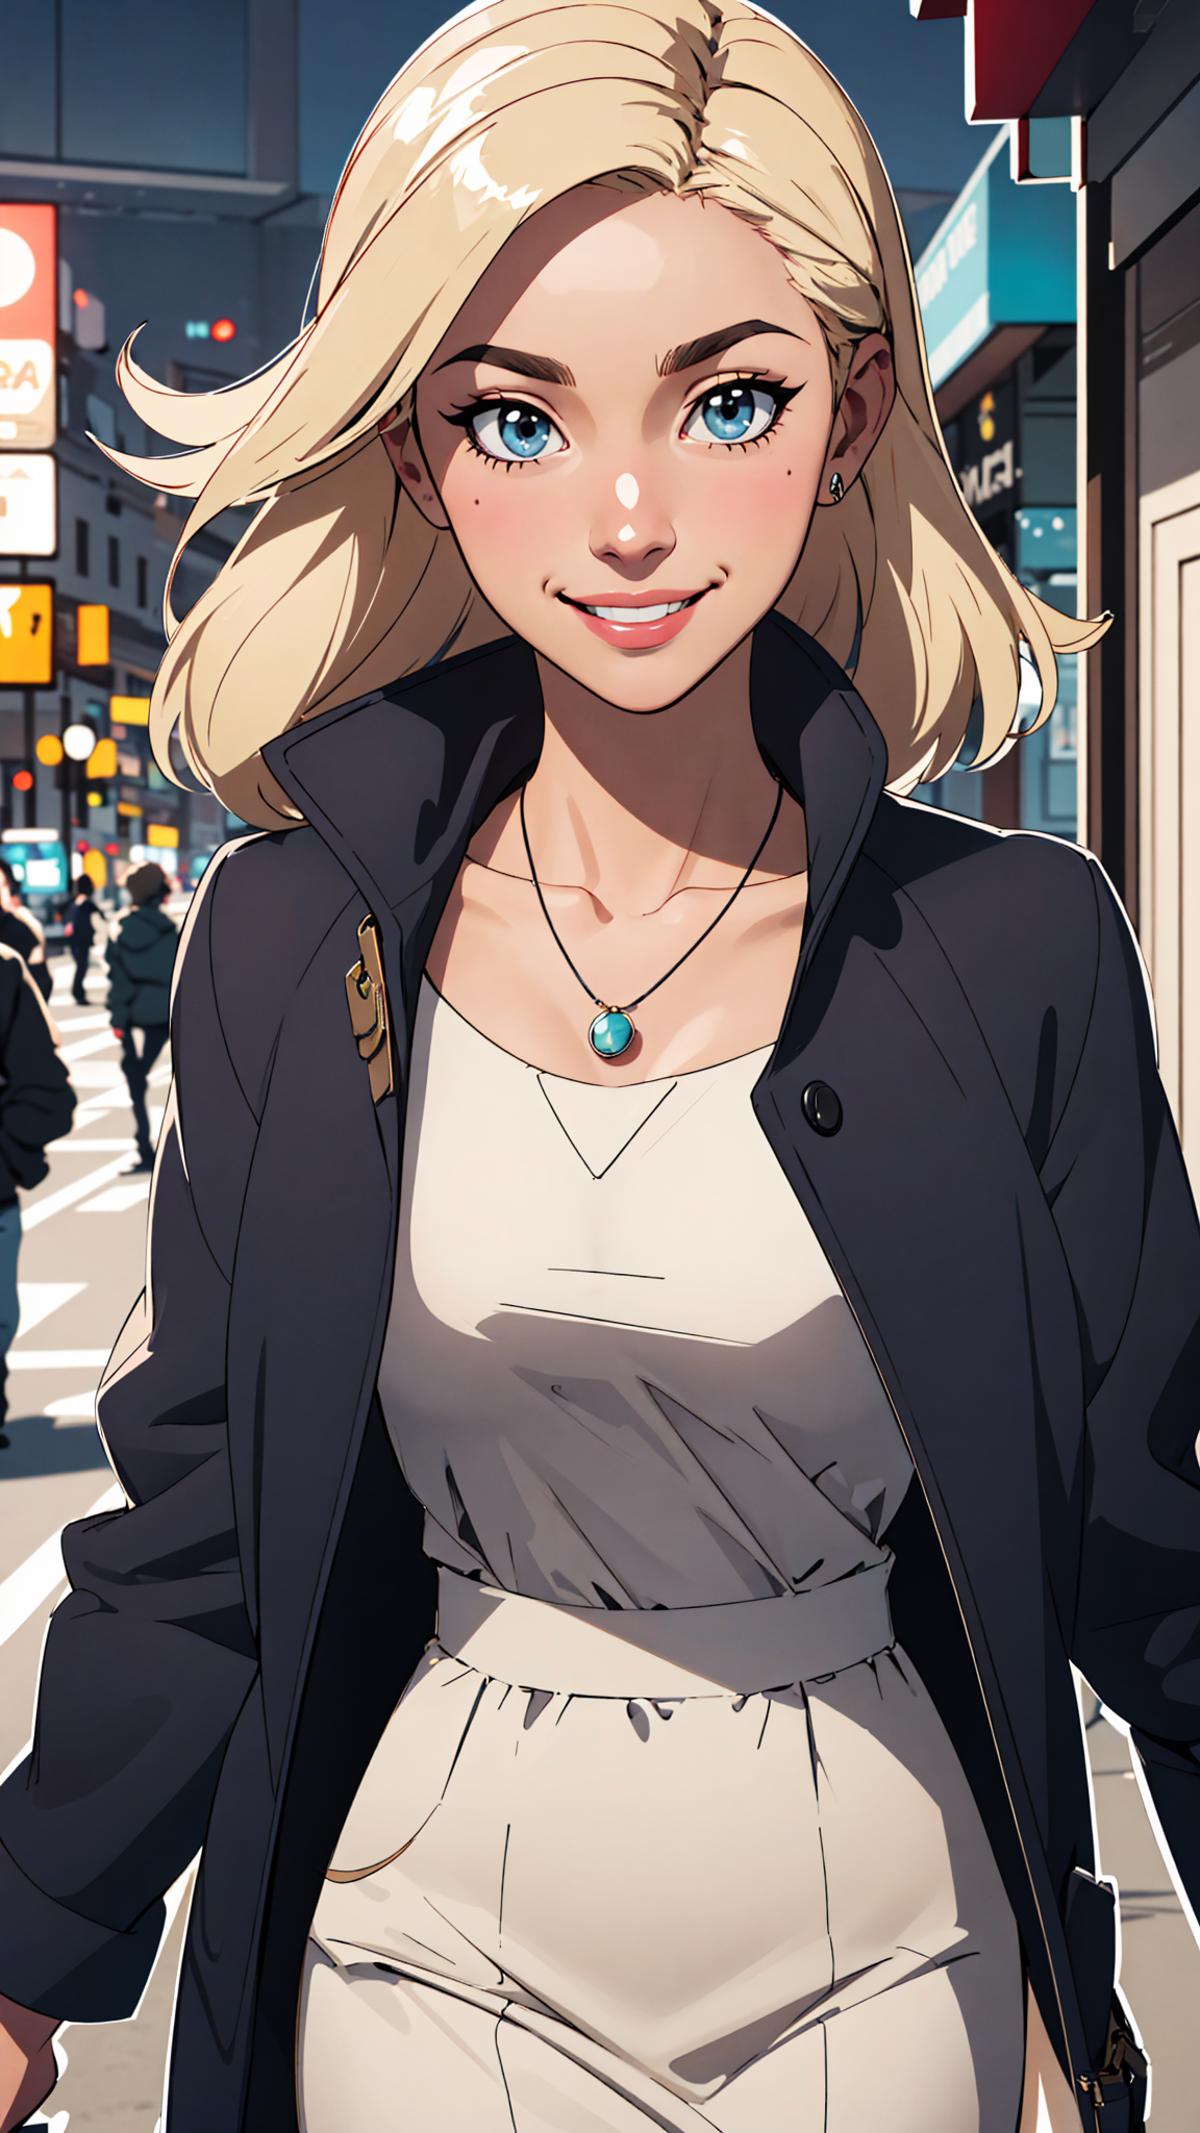 A woman in a white shirt and black jacket smiling and walking on a city street.